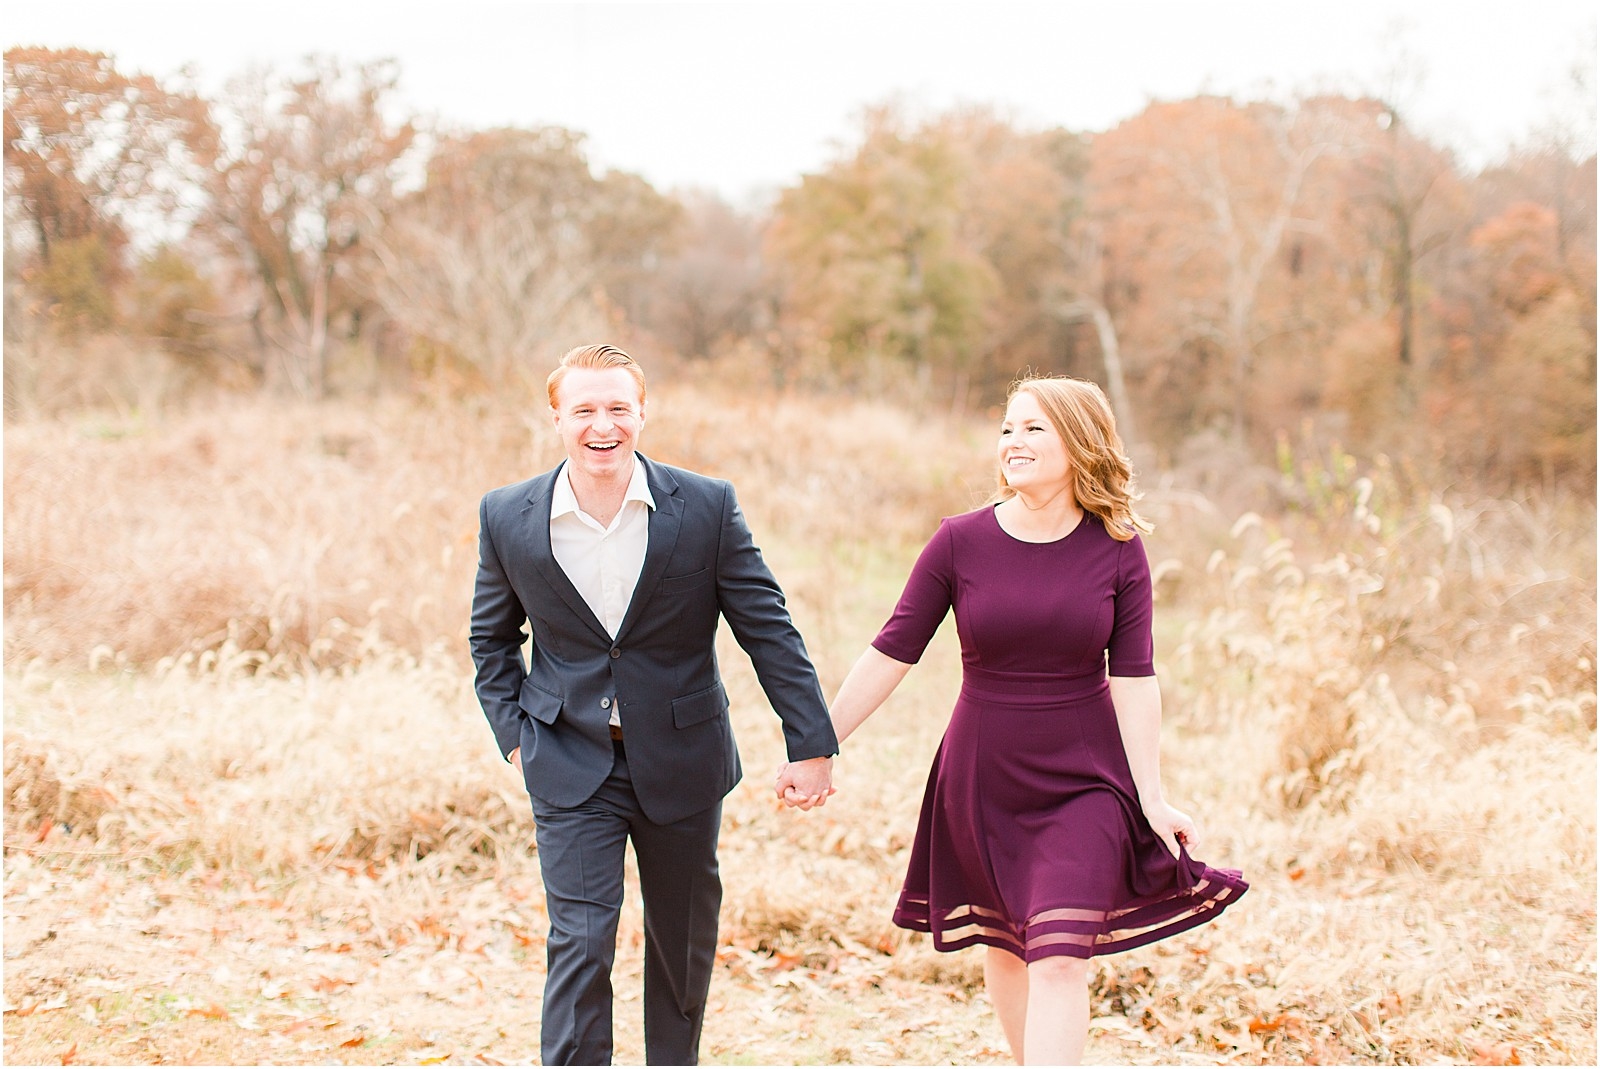 A Mesker Park Zoo Engagement Session | Jennah and Steve | Bret and Brandie Photography006.jpg